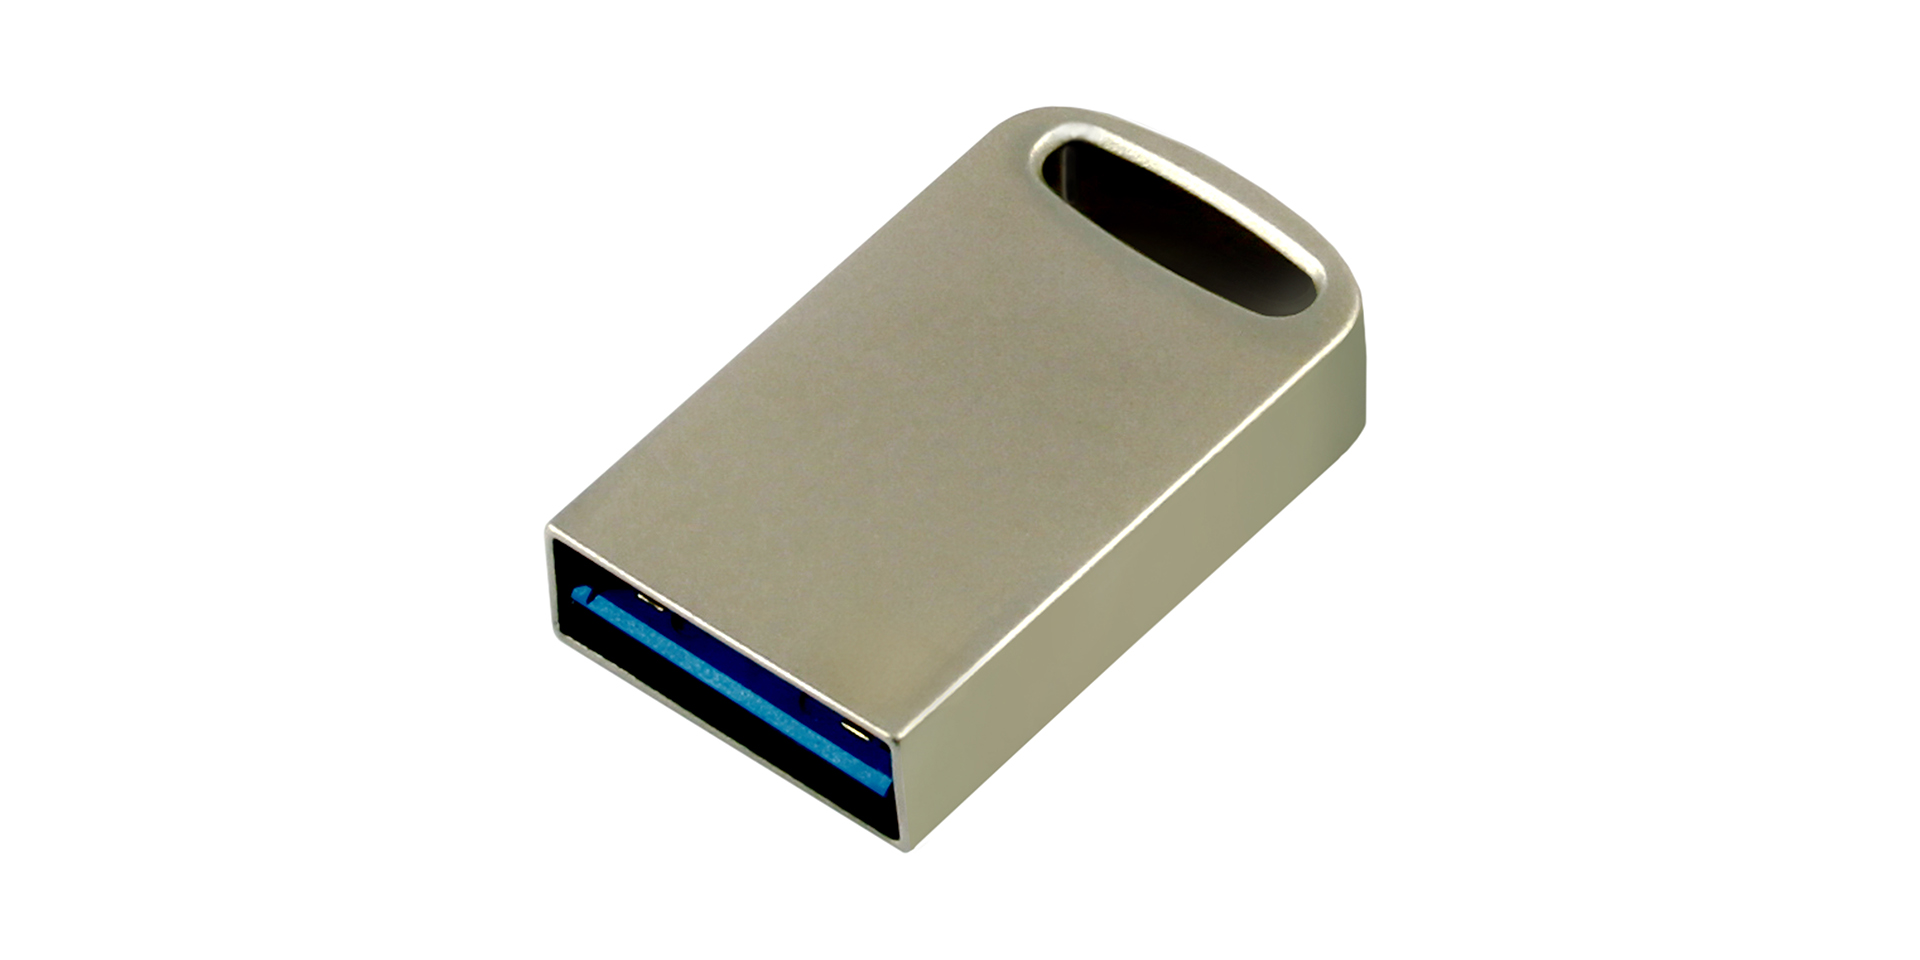 Small USB 3.0 for laser engraving